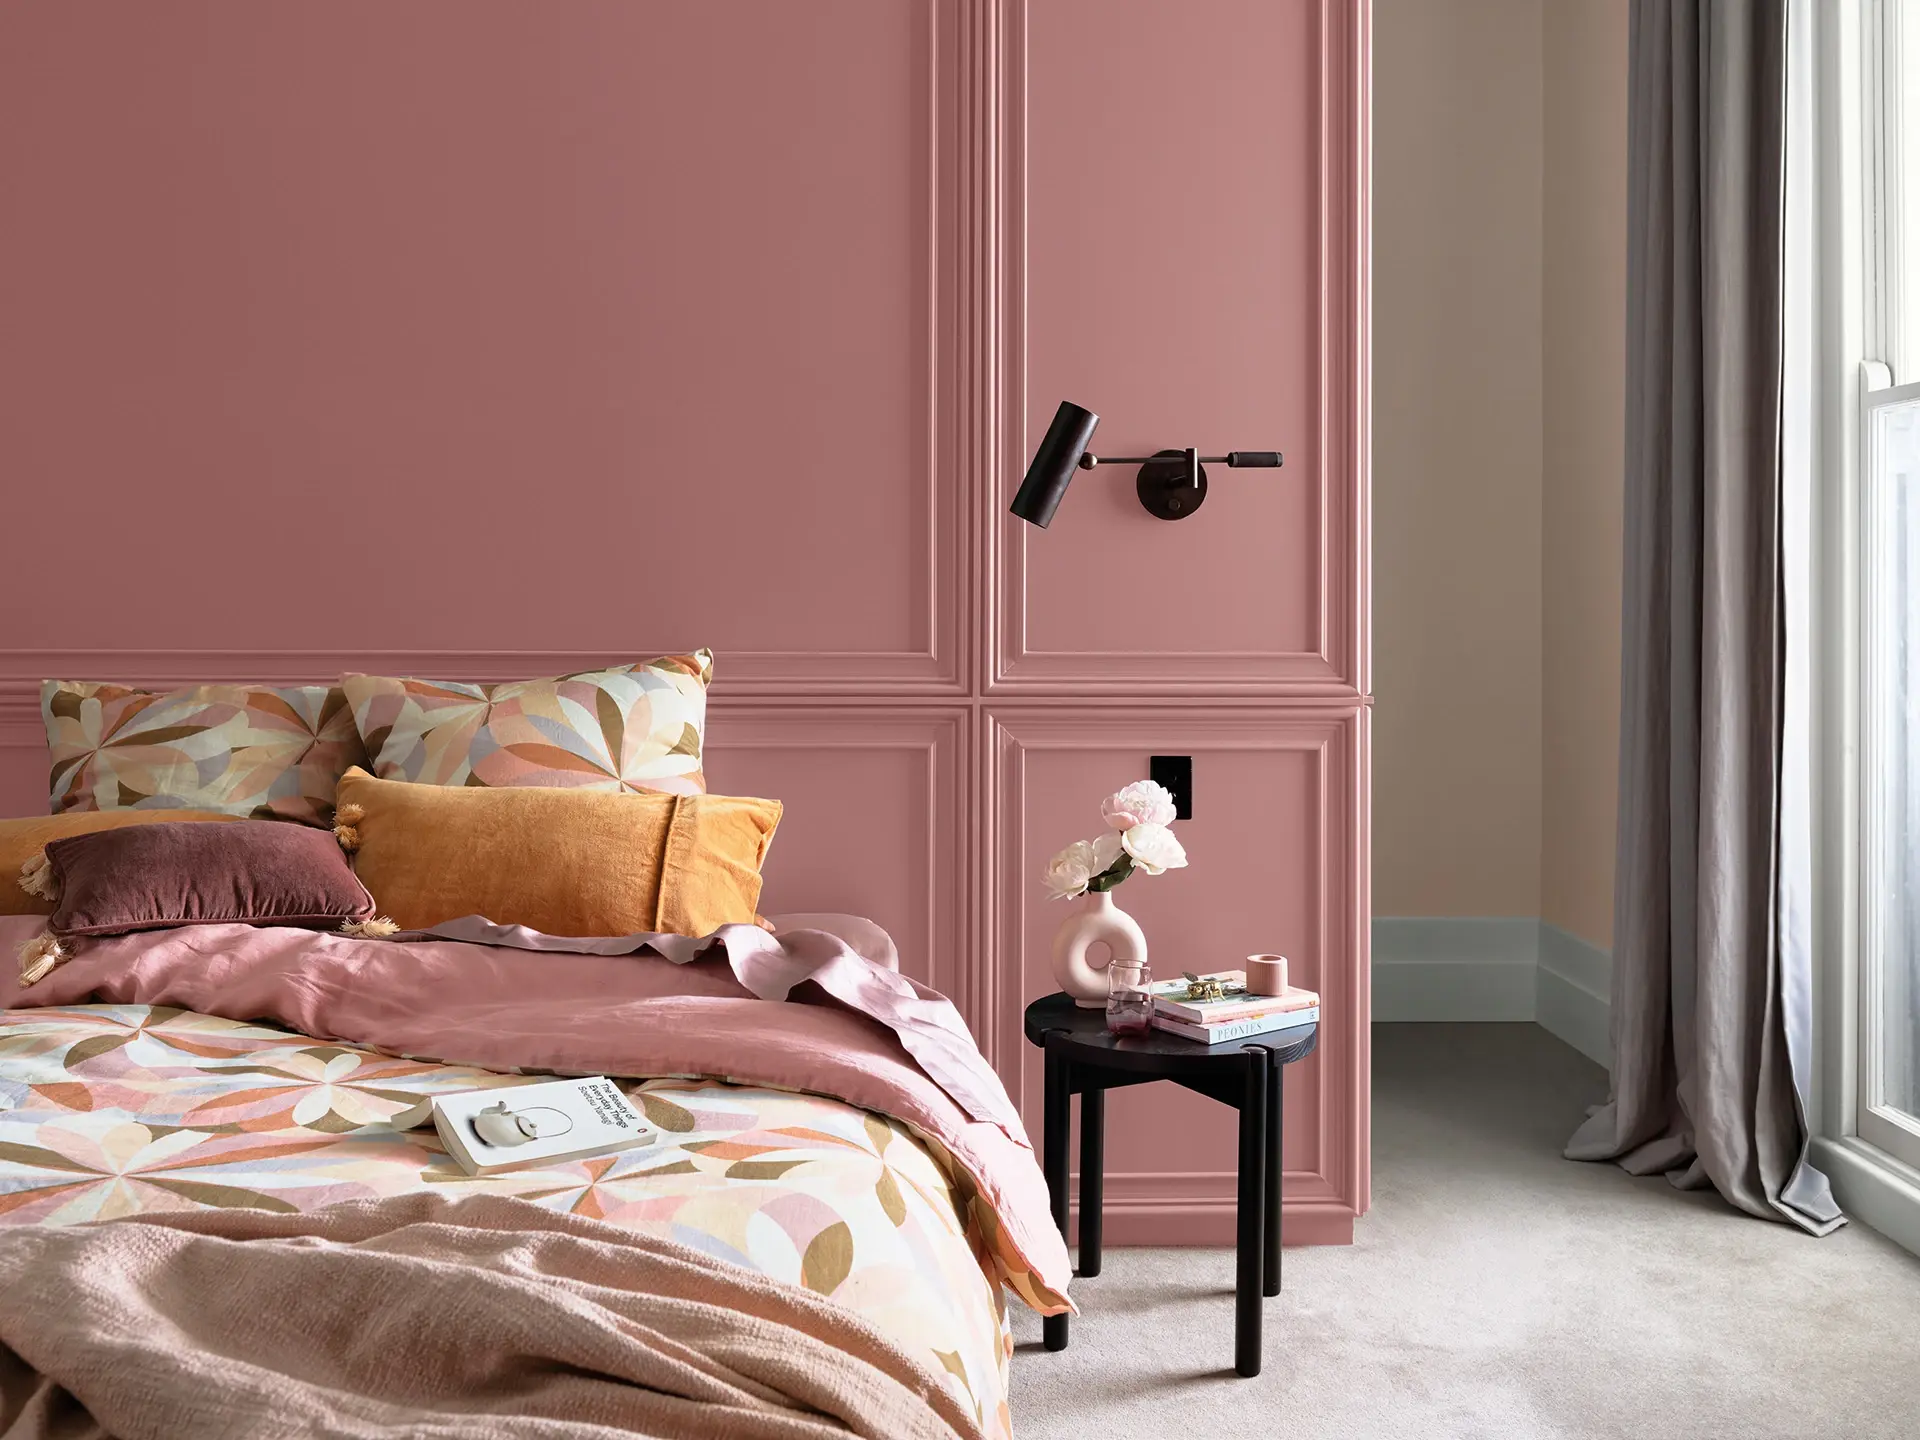 Bedroom with pink wall, pink and orange bedding and neutral carpet and curtains
colour: Terra Rose
